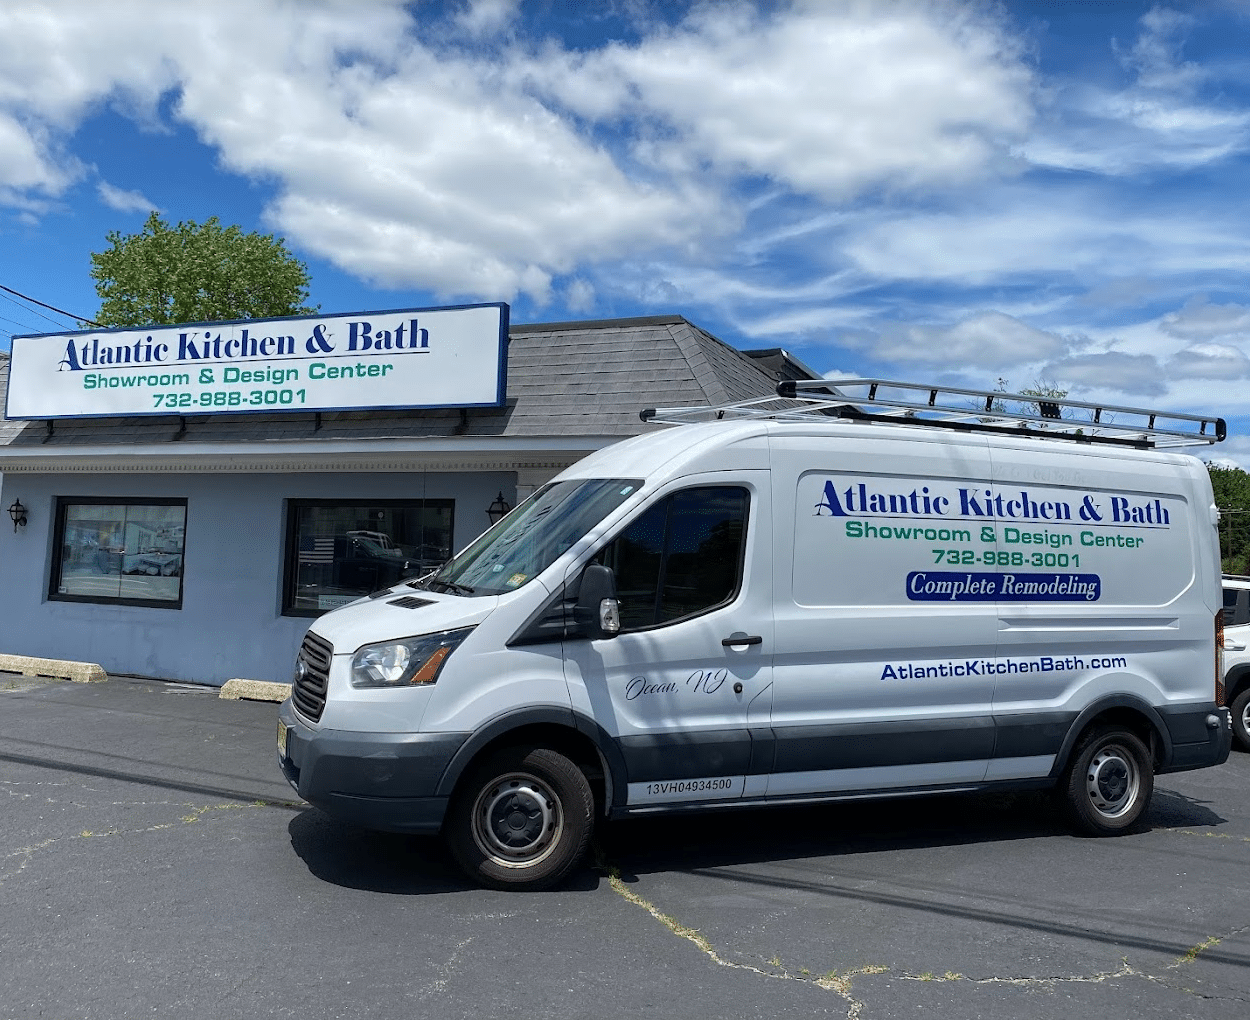 Atlantic Kitchen and Bath Store front and Van